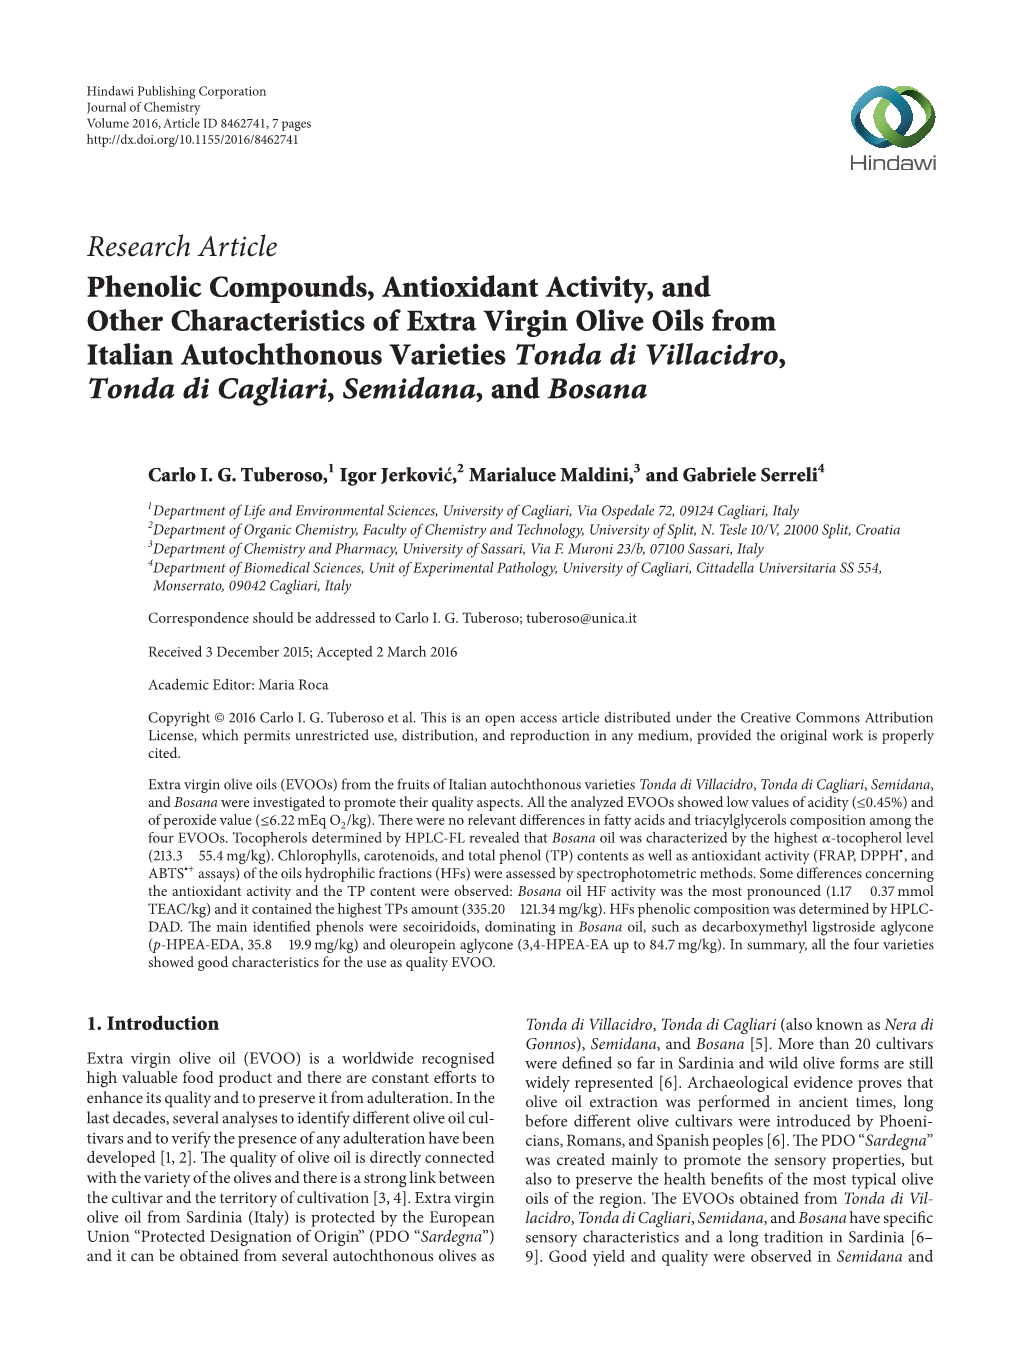 Phenolic Compounds, Antioxidant Activity, and Other Characteristics Of